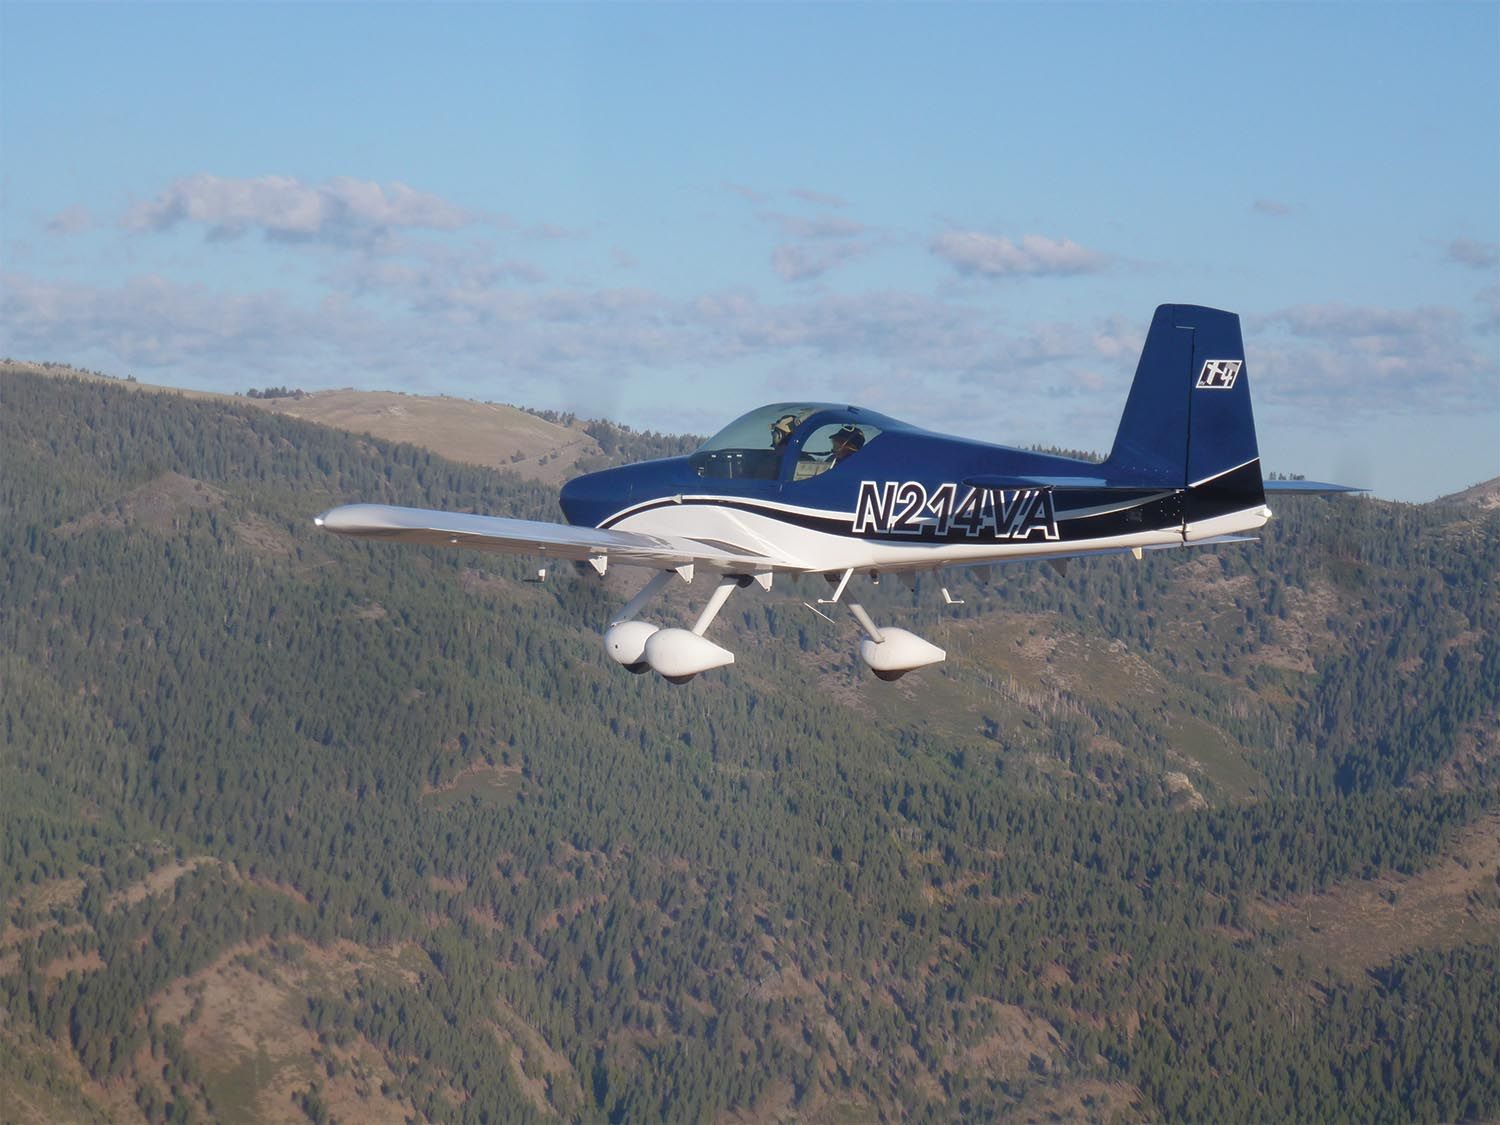 Doing a demo flight with an experienced transition trainer—as we did in the RV-14A with Mike Seager—gives you a chance to try out the edges of the airplane’s performance. (Photo: Courtesy of Van’s Aircraft, Inc.)